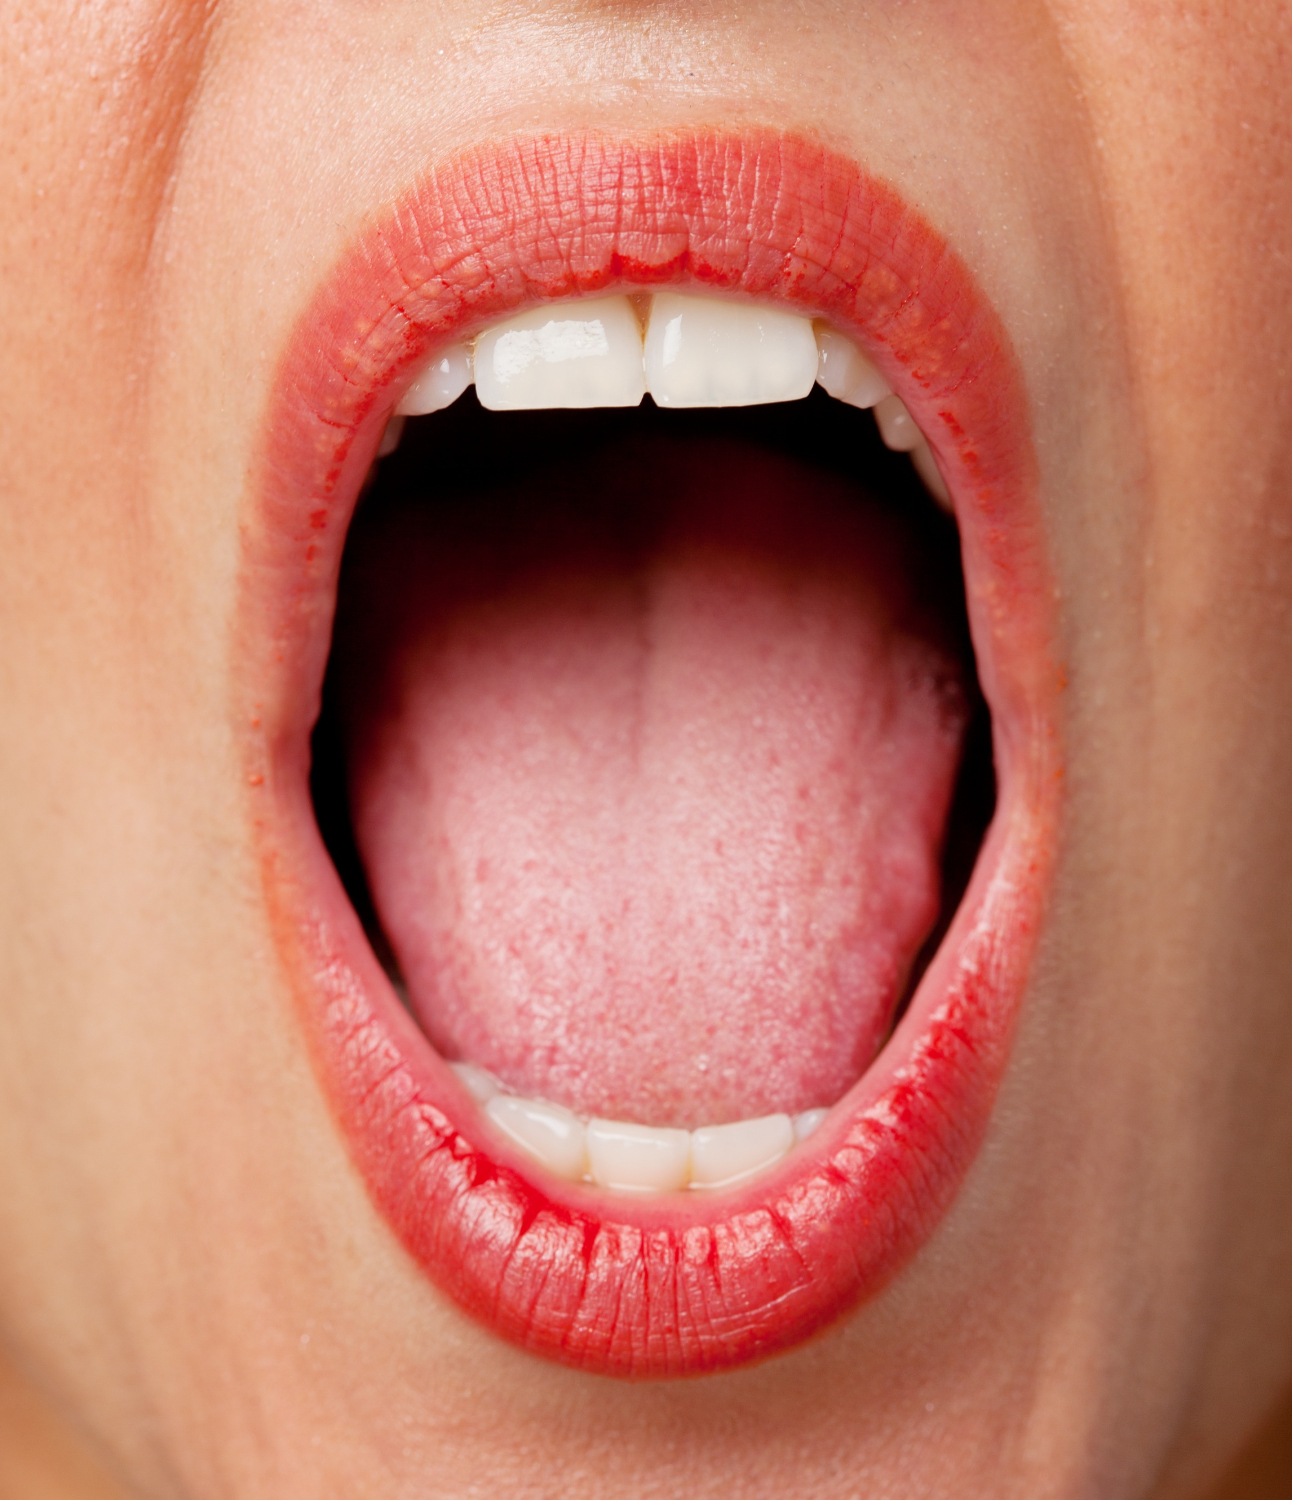  The Risks and Rewards of Cutting off Swollen Taste Buds